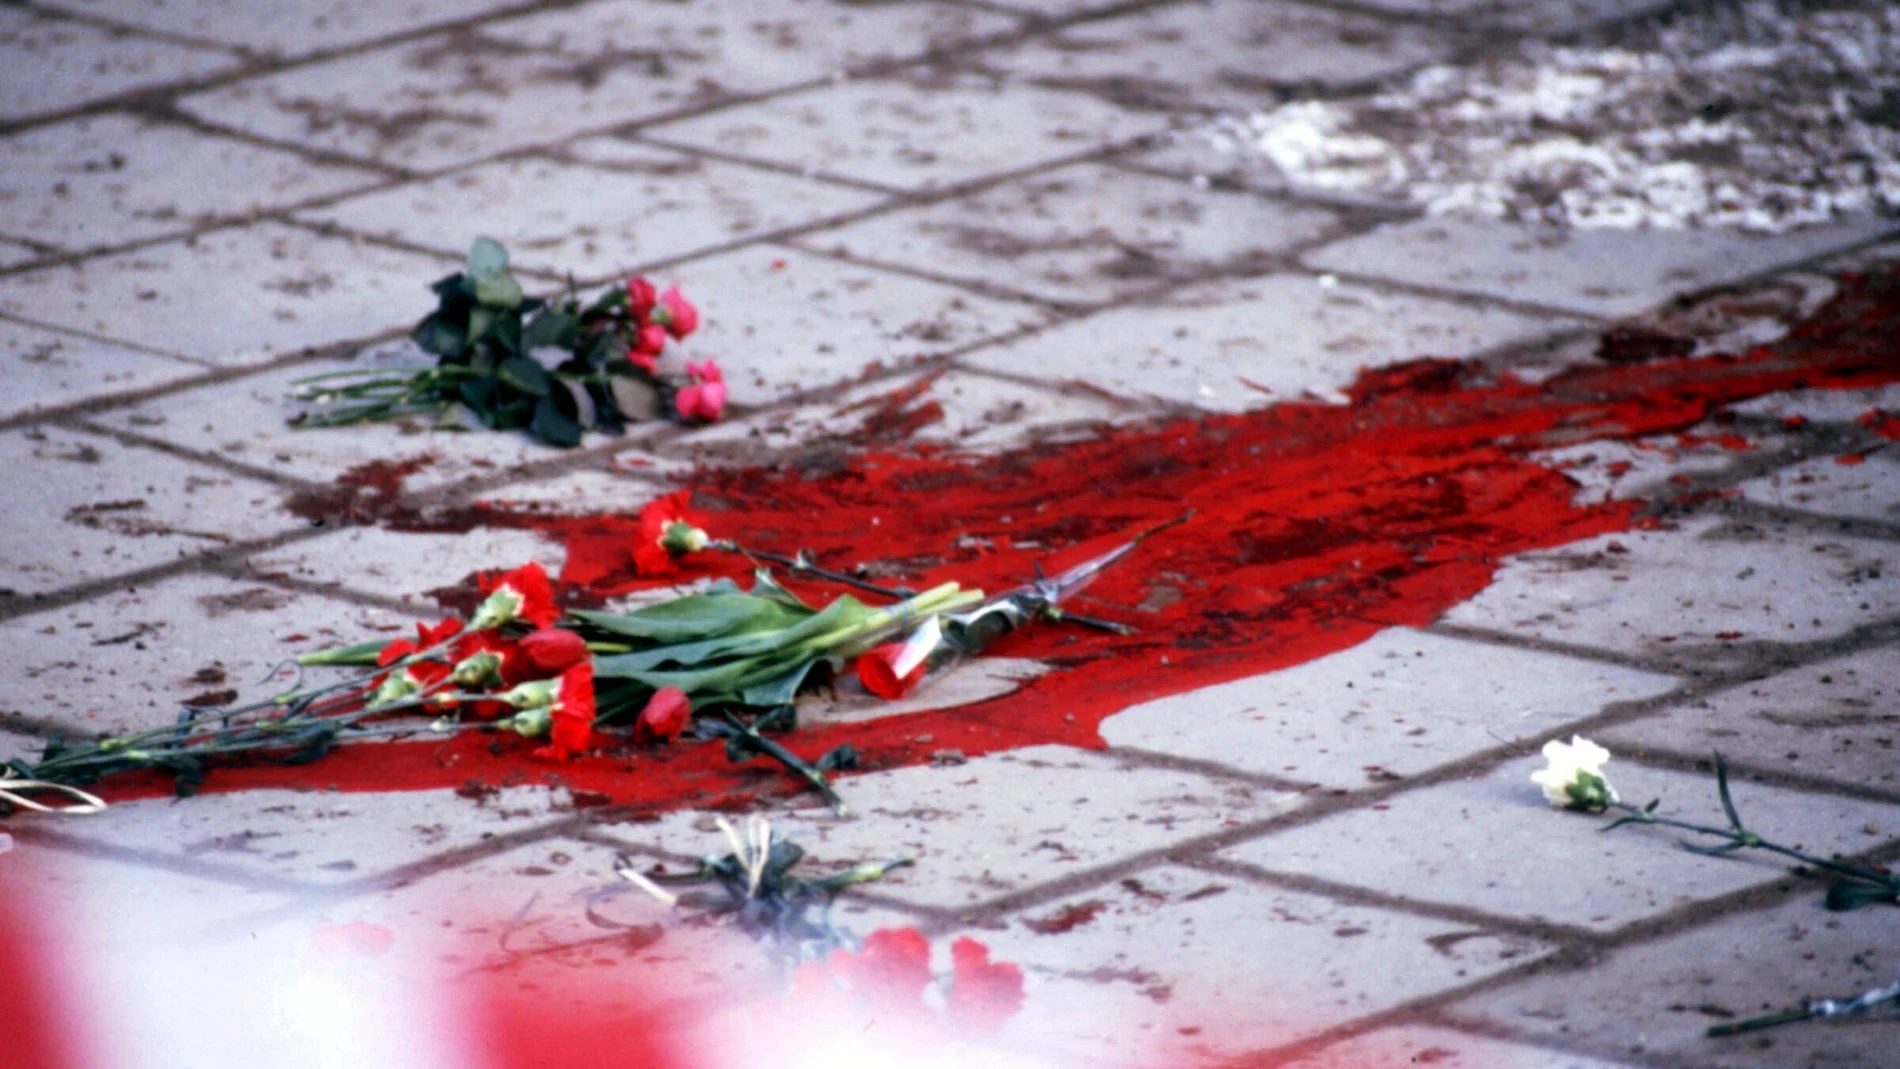 SENSITIVE MATERIAL. THIS IMAGE MAY OFFEND OR DISTURB Flowers at the site where the Swedish Prime Minister Olof Palme was shot to death at Sveavagen in Stockholm, March 1, 1986. Picture taken March 1, 1986. TT News Agency/via REUTERS ATTENTION EDITORS - THIS IMAGE WAS PROVIDED BY A THIRD PARTY. SWEDEN OUT. NO COMMERCIAL OR EDITORIAL SALES IN SWEDEN.